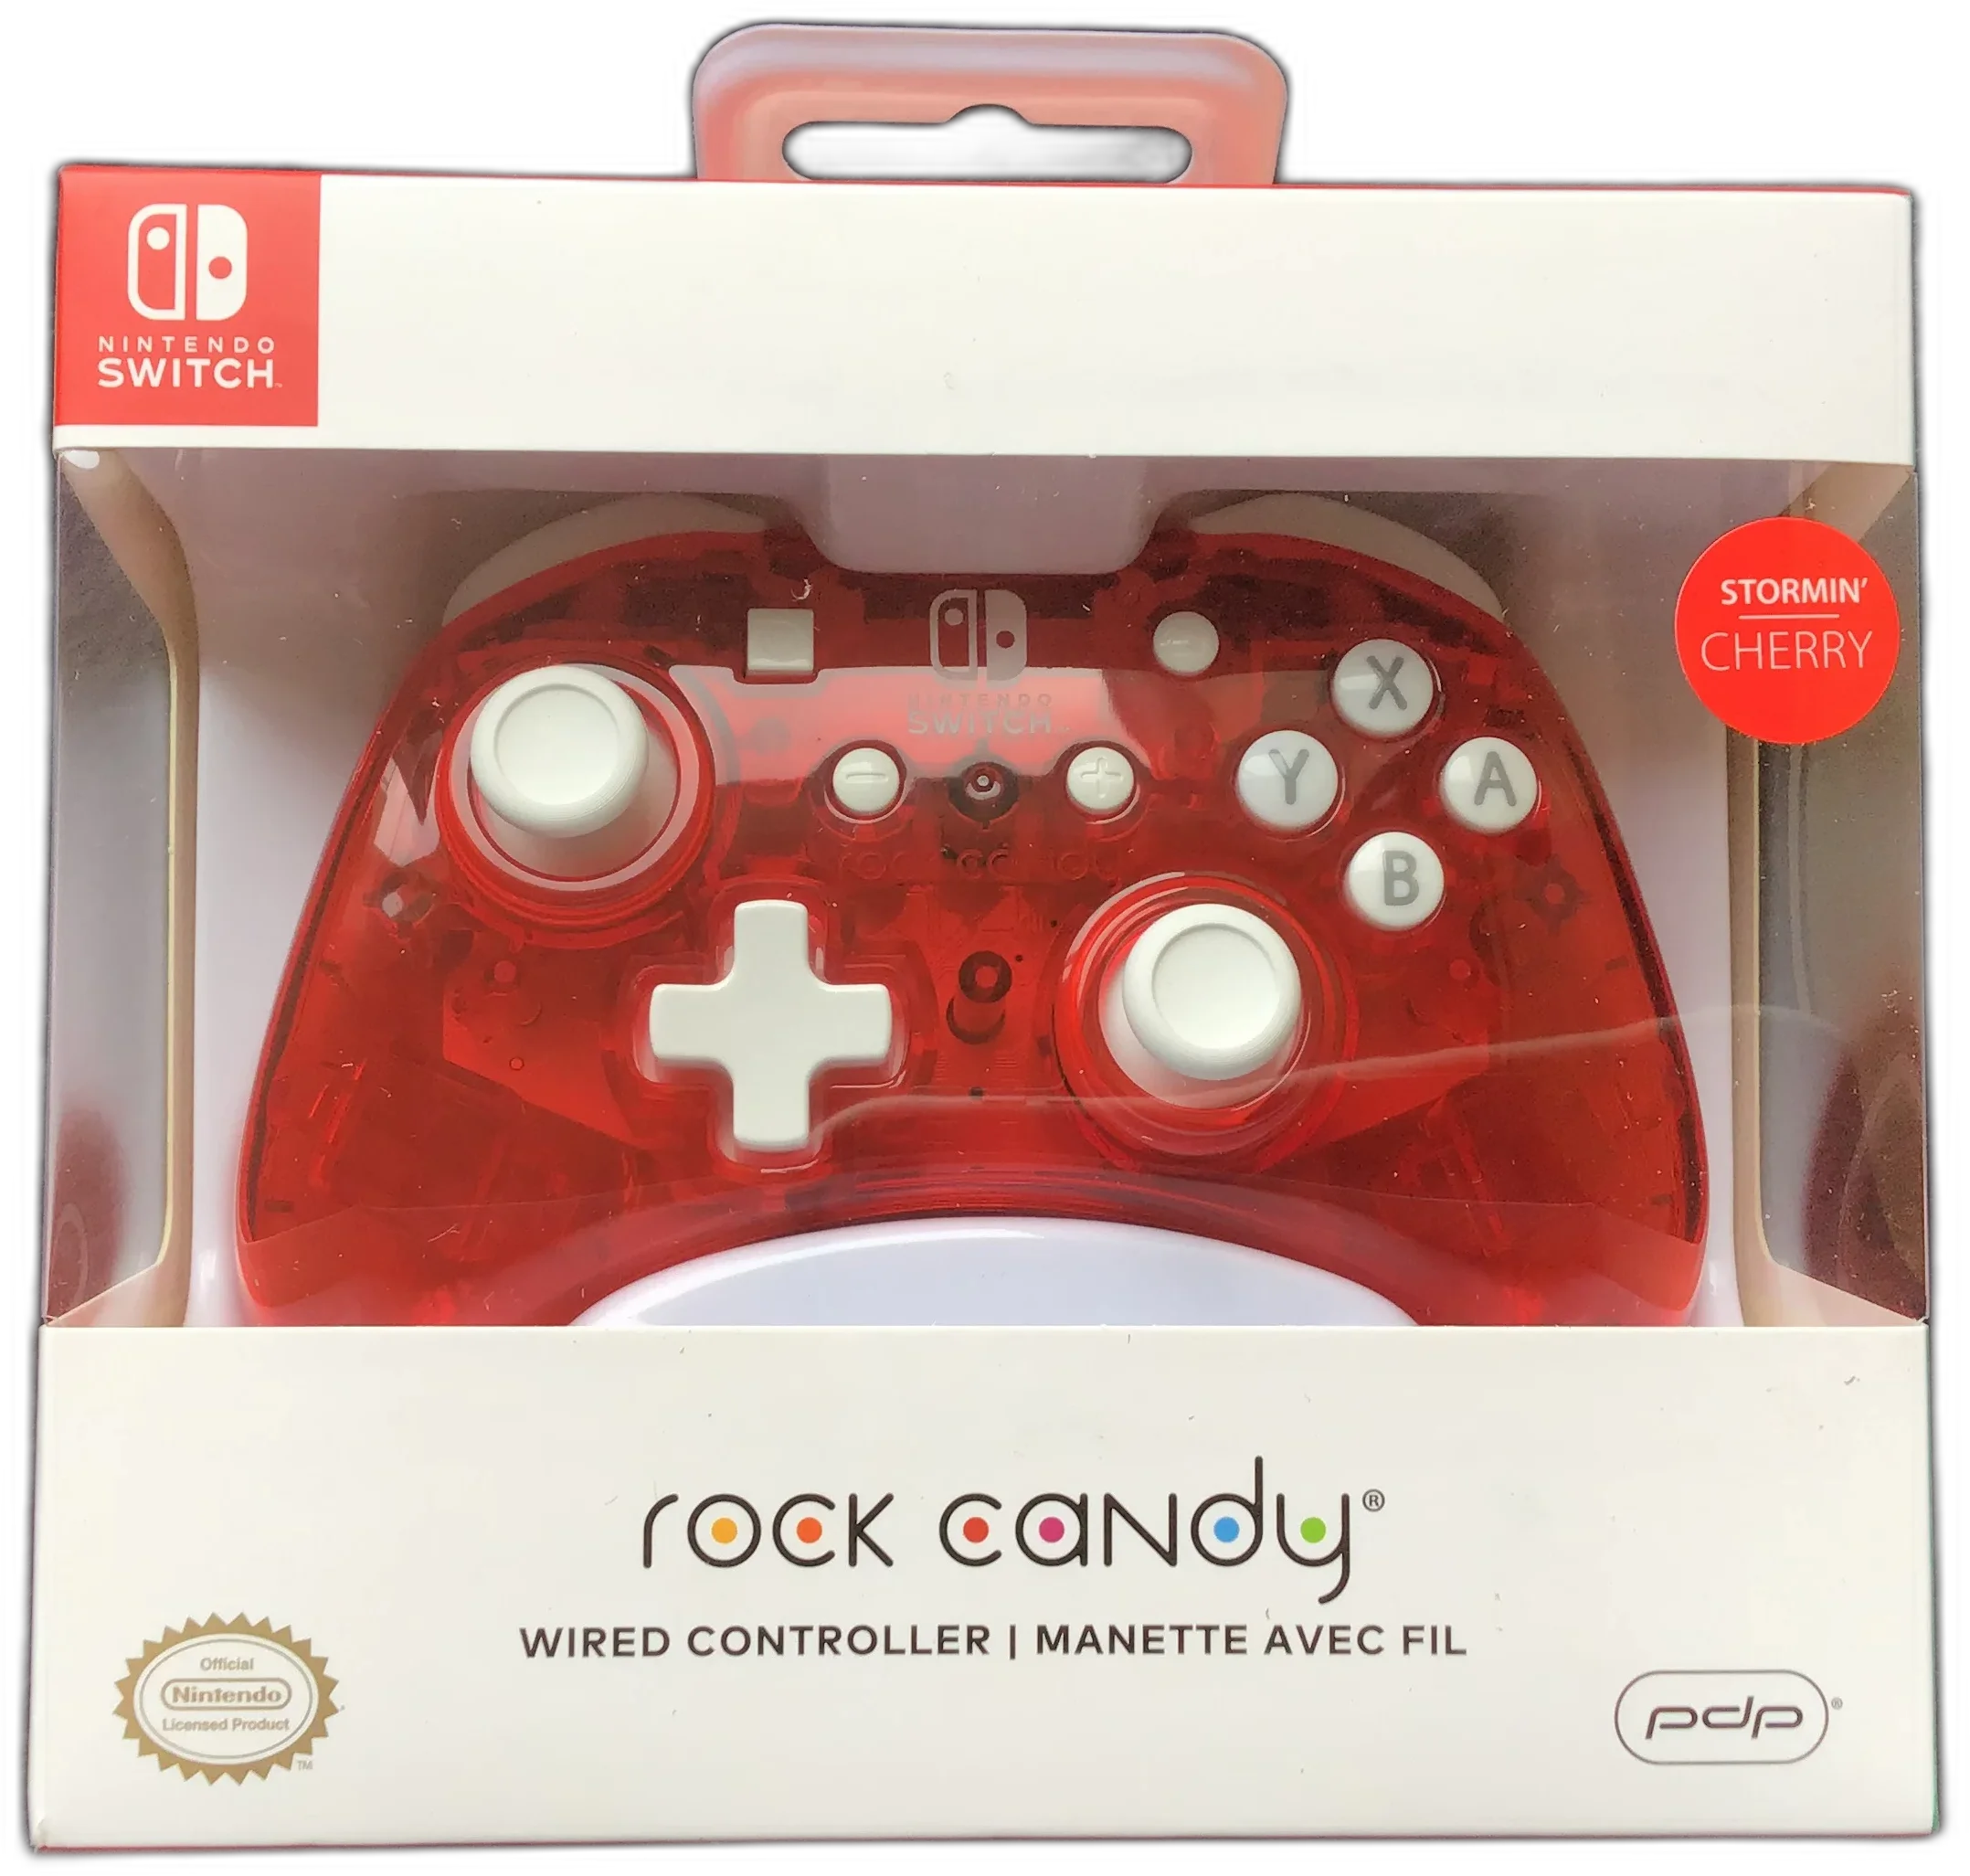  PDP Switch Rock Candy Red Controller